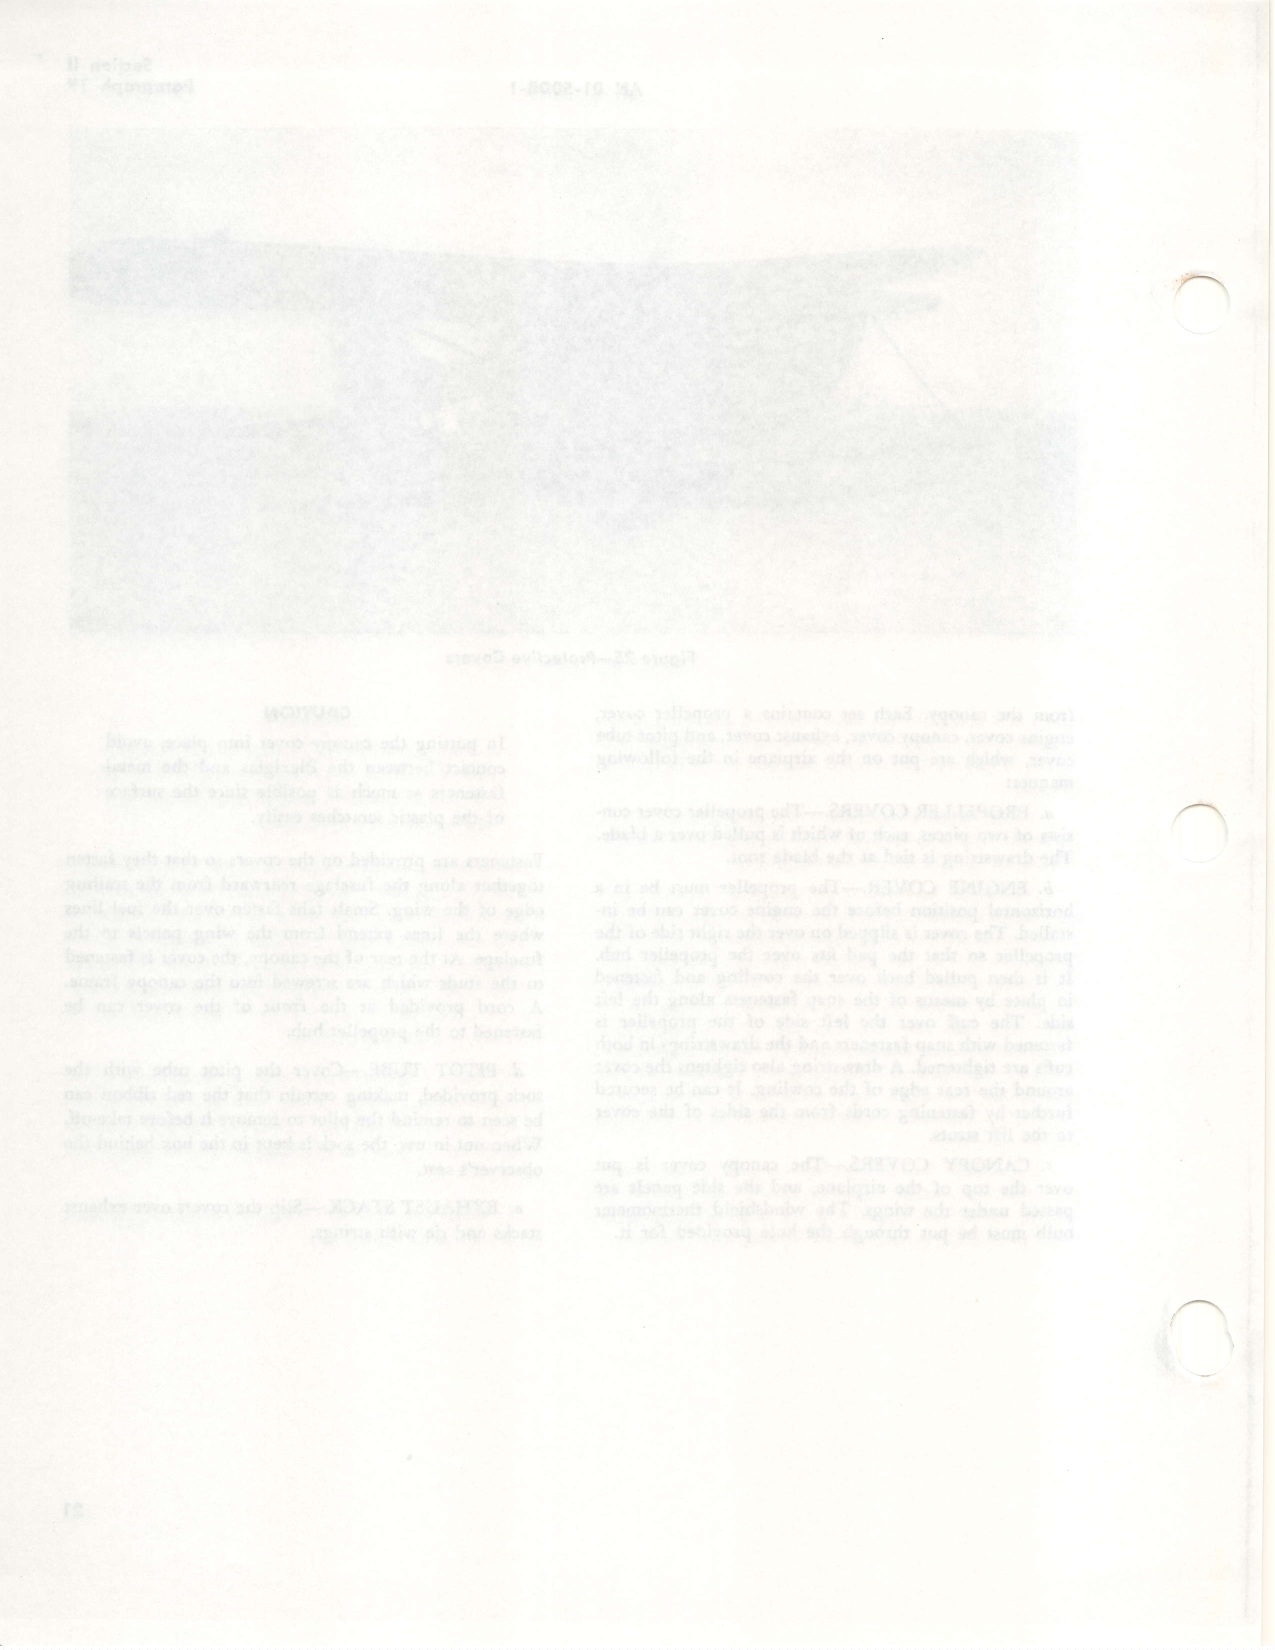 Sample page 28 from AirCorps Library document: Flight Handbook - L-5, OY-1, OY-2